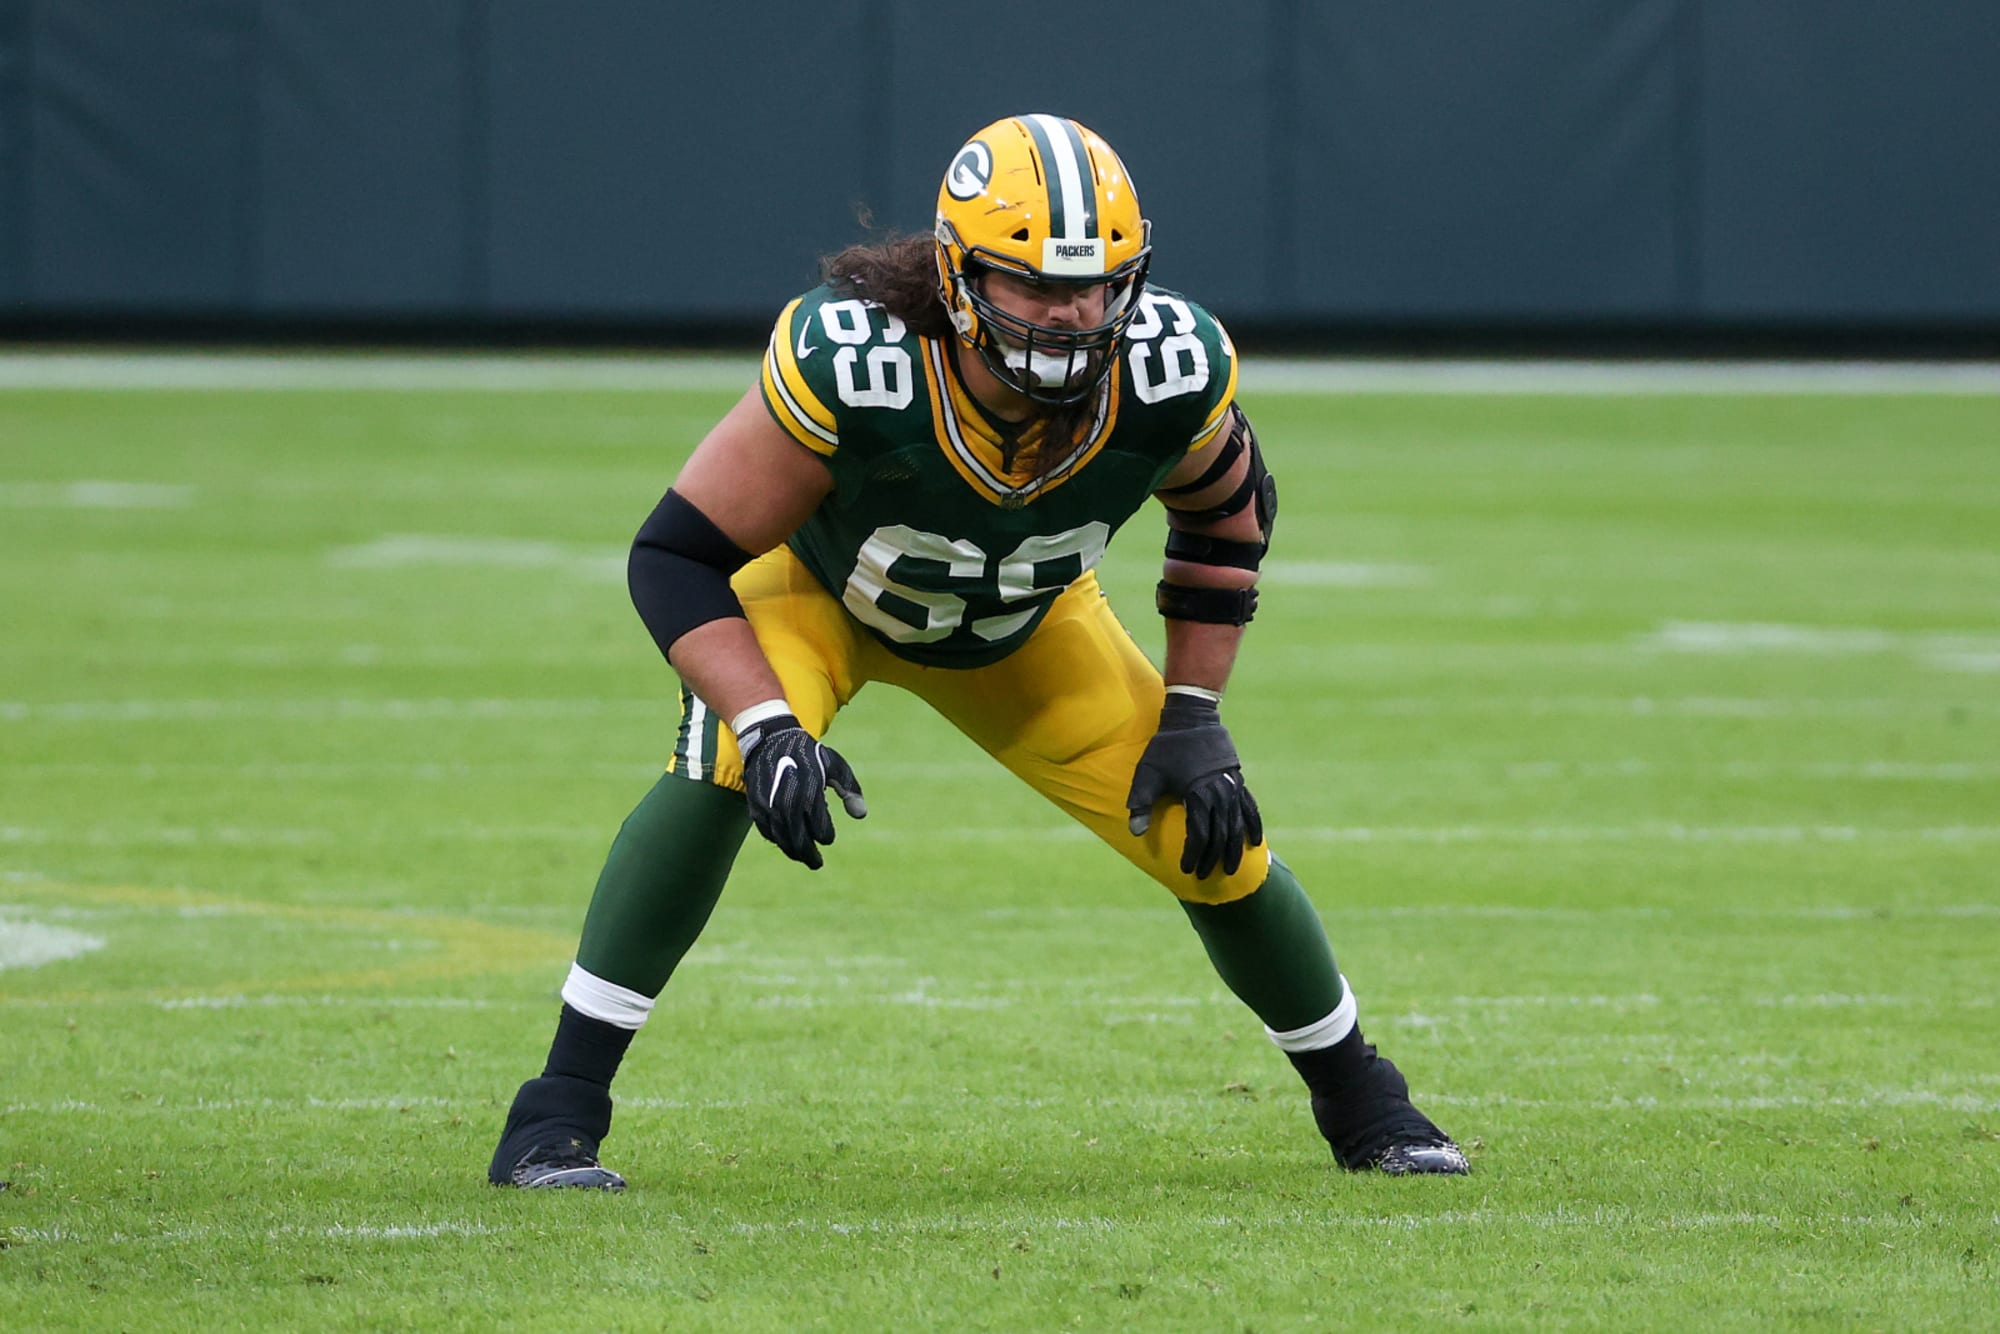 Despite missing most of 2021, David Bakhtiari is still considered one of the most important Packers players